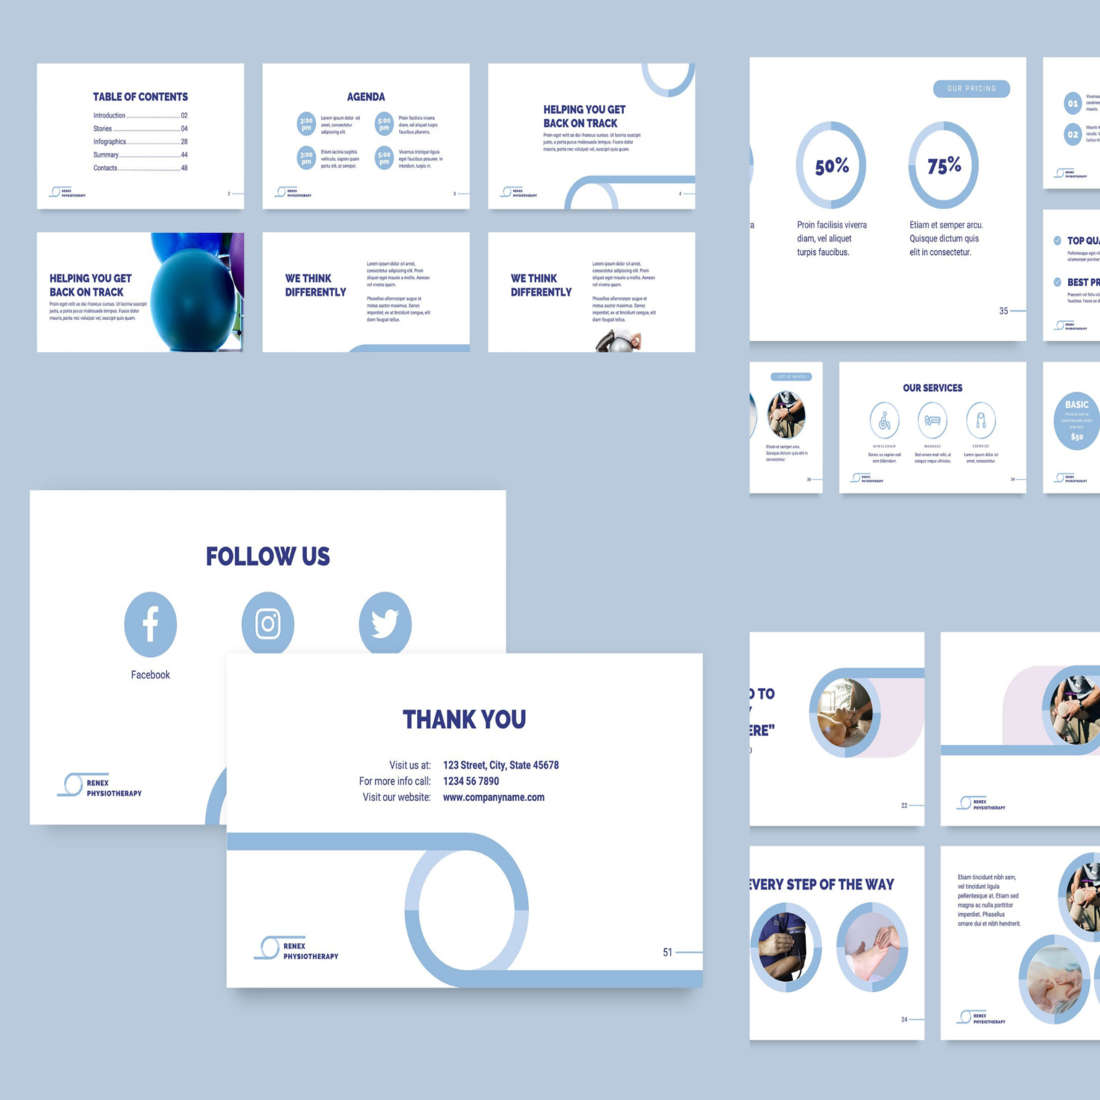 Physiotherapy PowerPoint Presentation Template cover image.